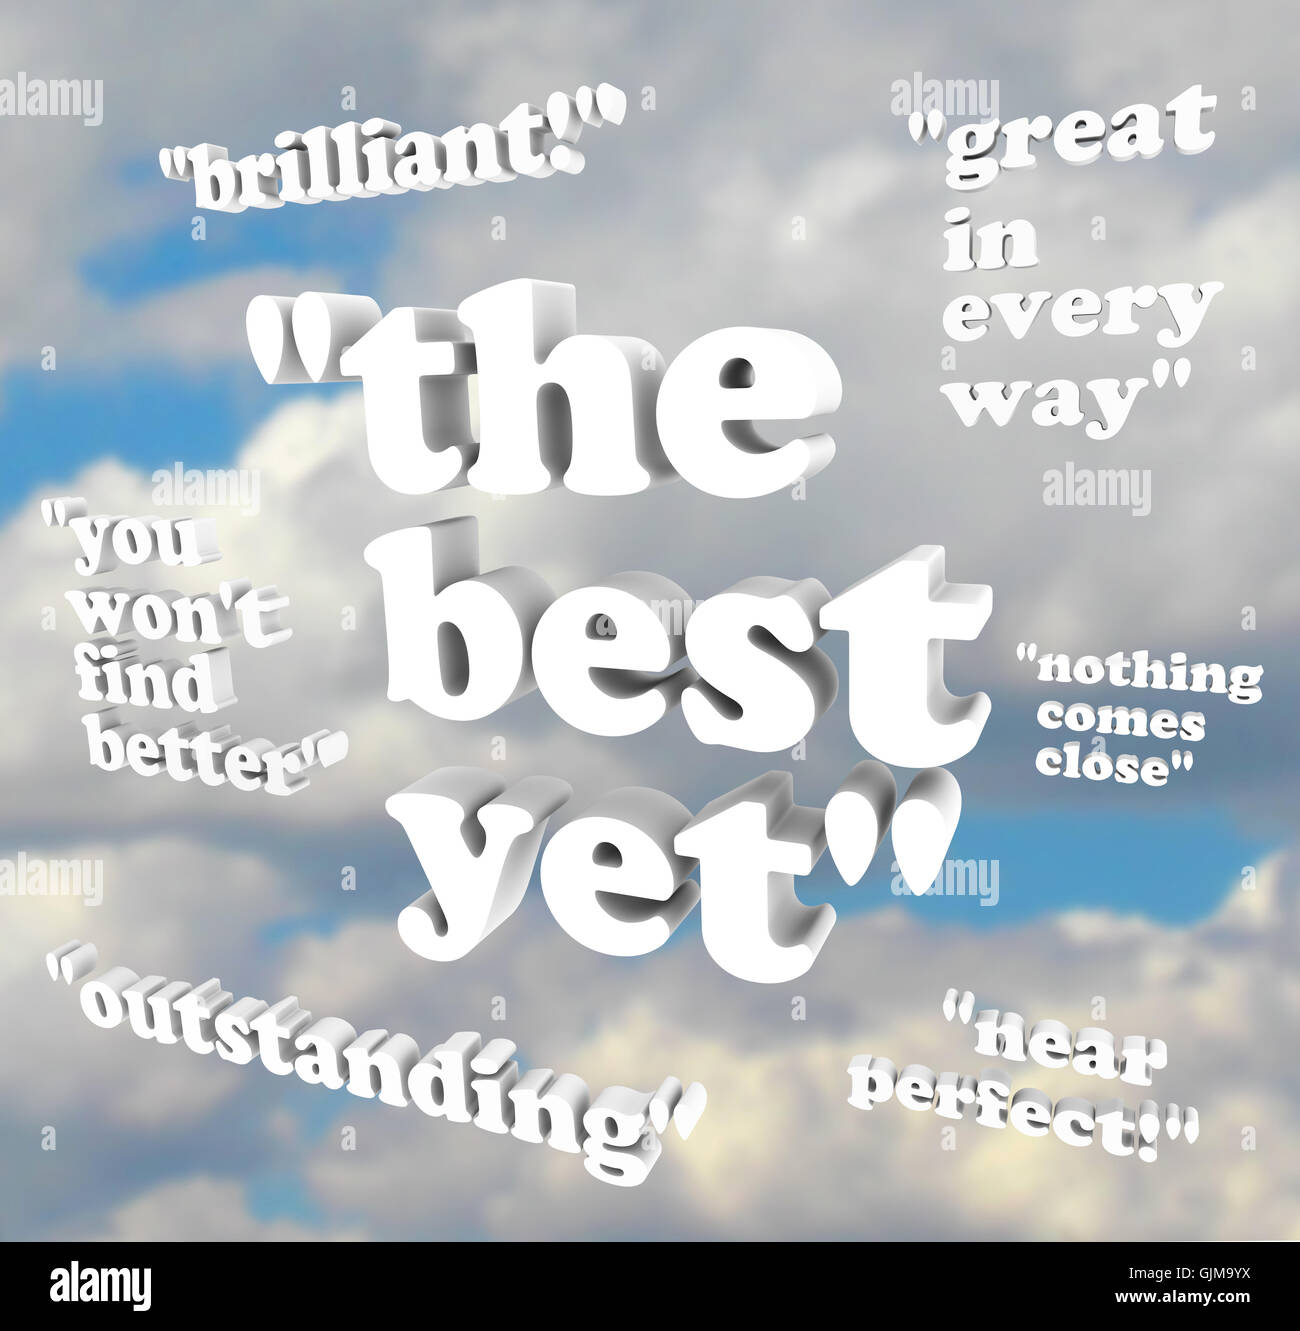 The Best Yet - Quotations of Praise Stock Photo